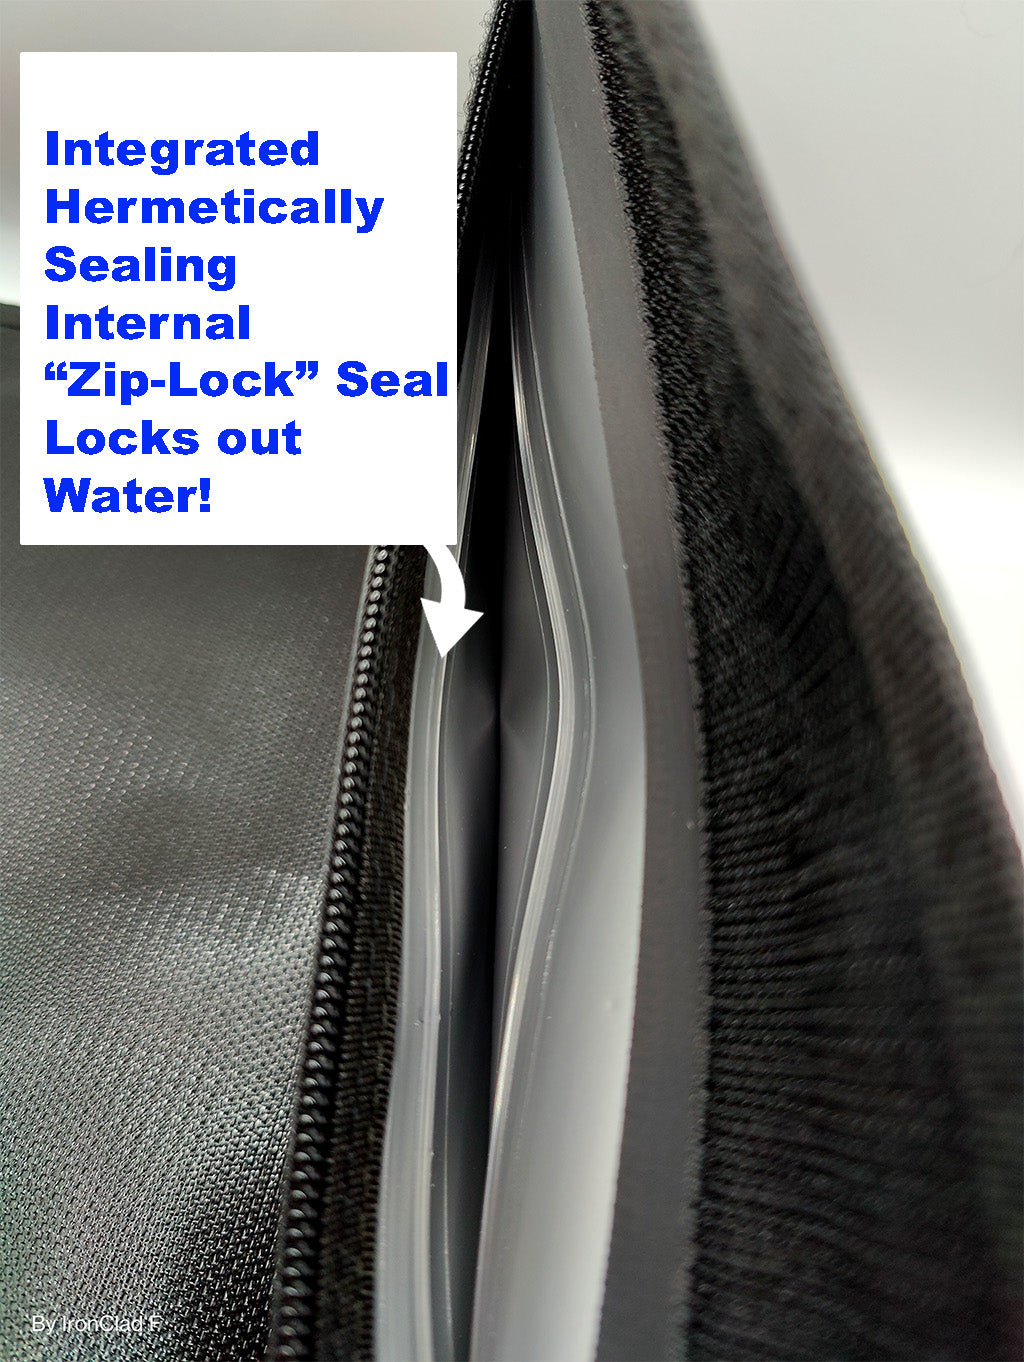 Inside view of the fireproof bag with an open zipper